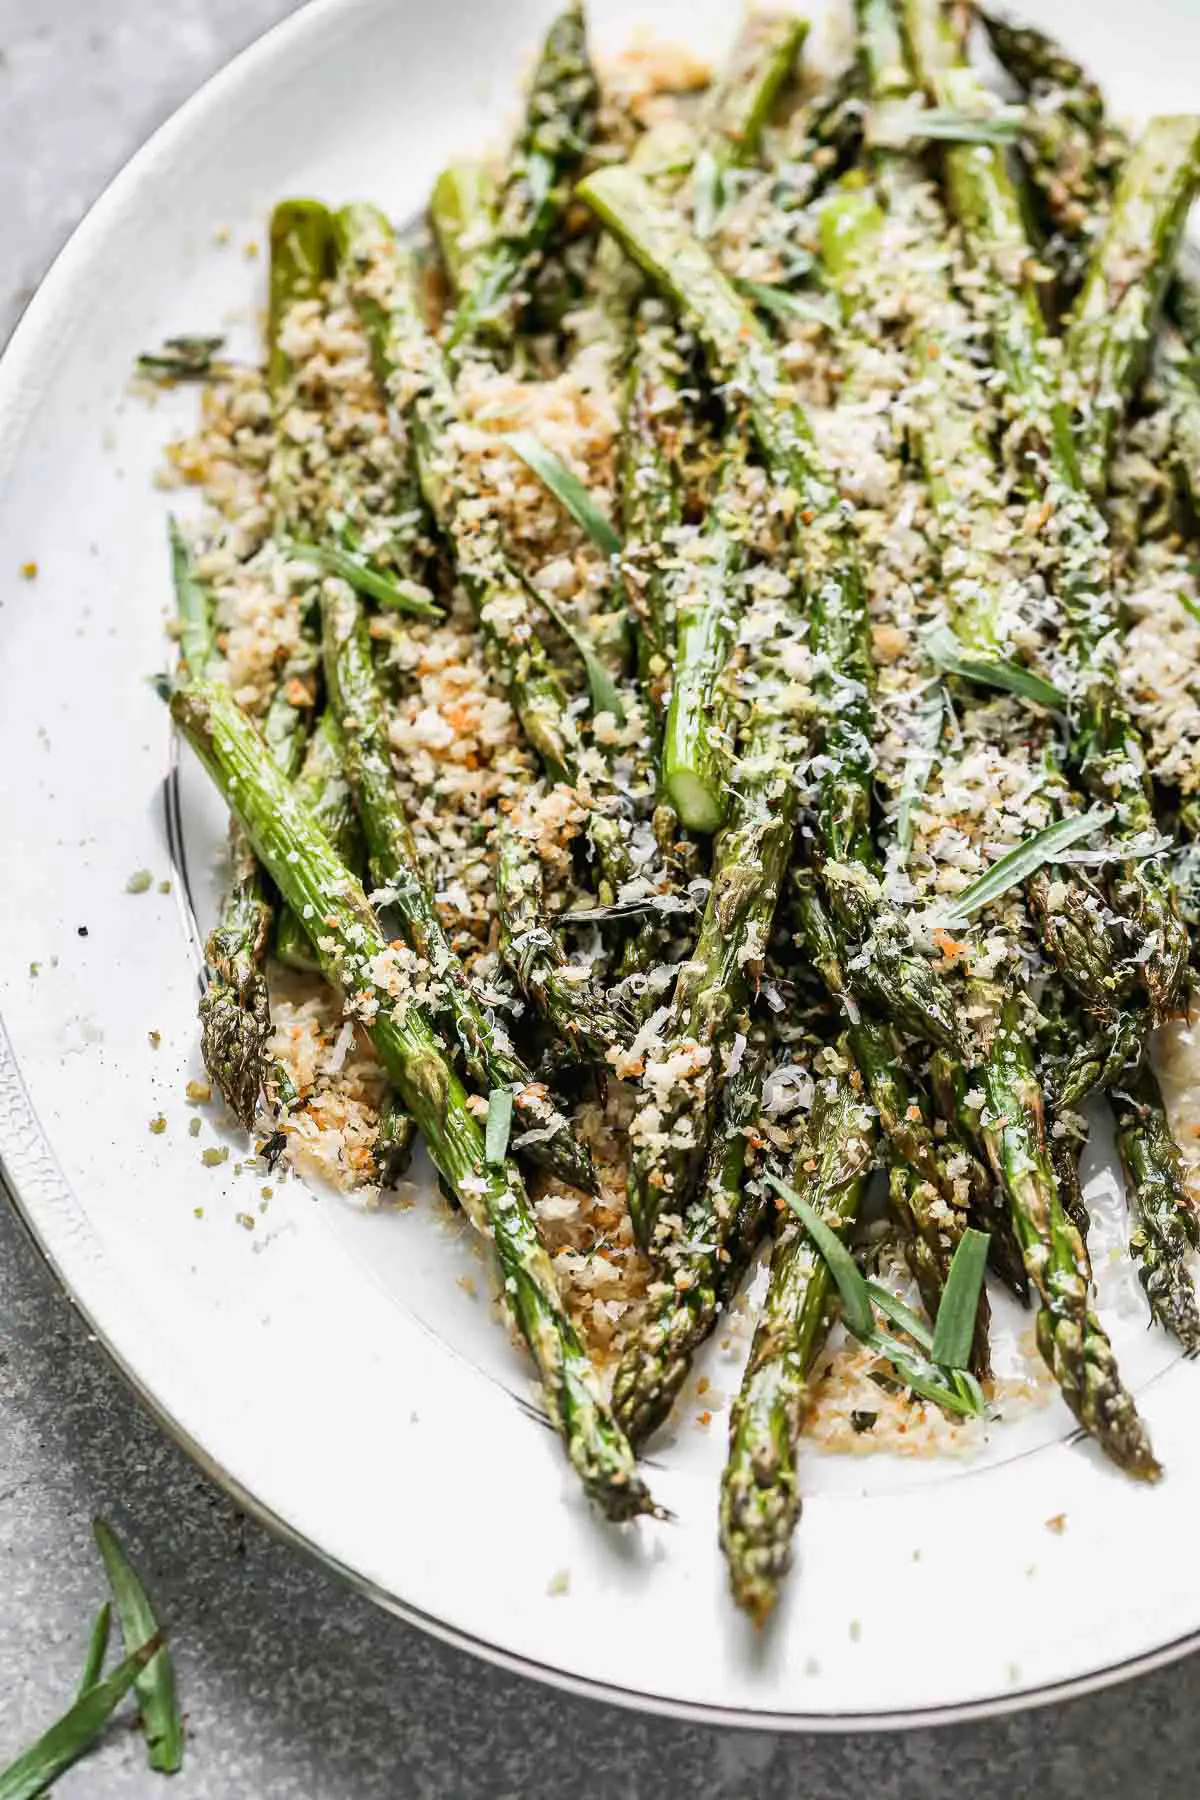 Tender and crispy on the outside with a slight bite on the inside, and covered in cheesy garlicky breadcrumbs (with hints of lemon!), our Easy Roasted Asparagus with Breadcrumbs is the perfect way to up your roasted veggie game this spring. Make a double or triple batch to feed a crowd, or scale it back to feed a family of four. 